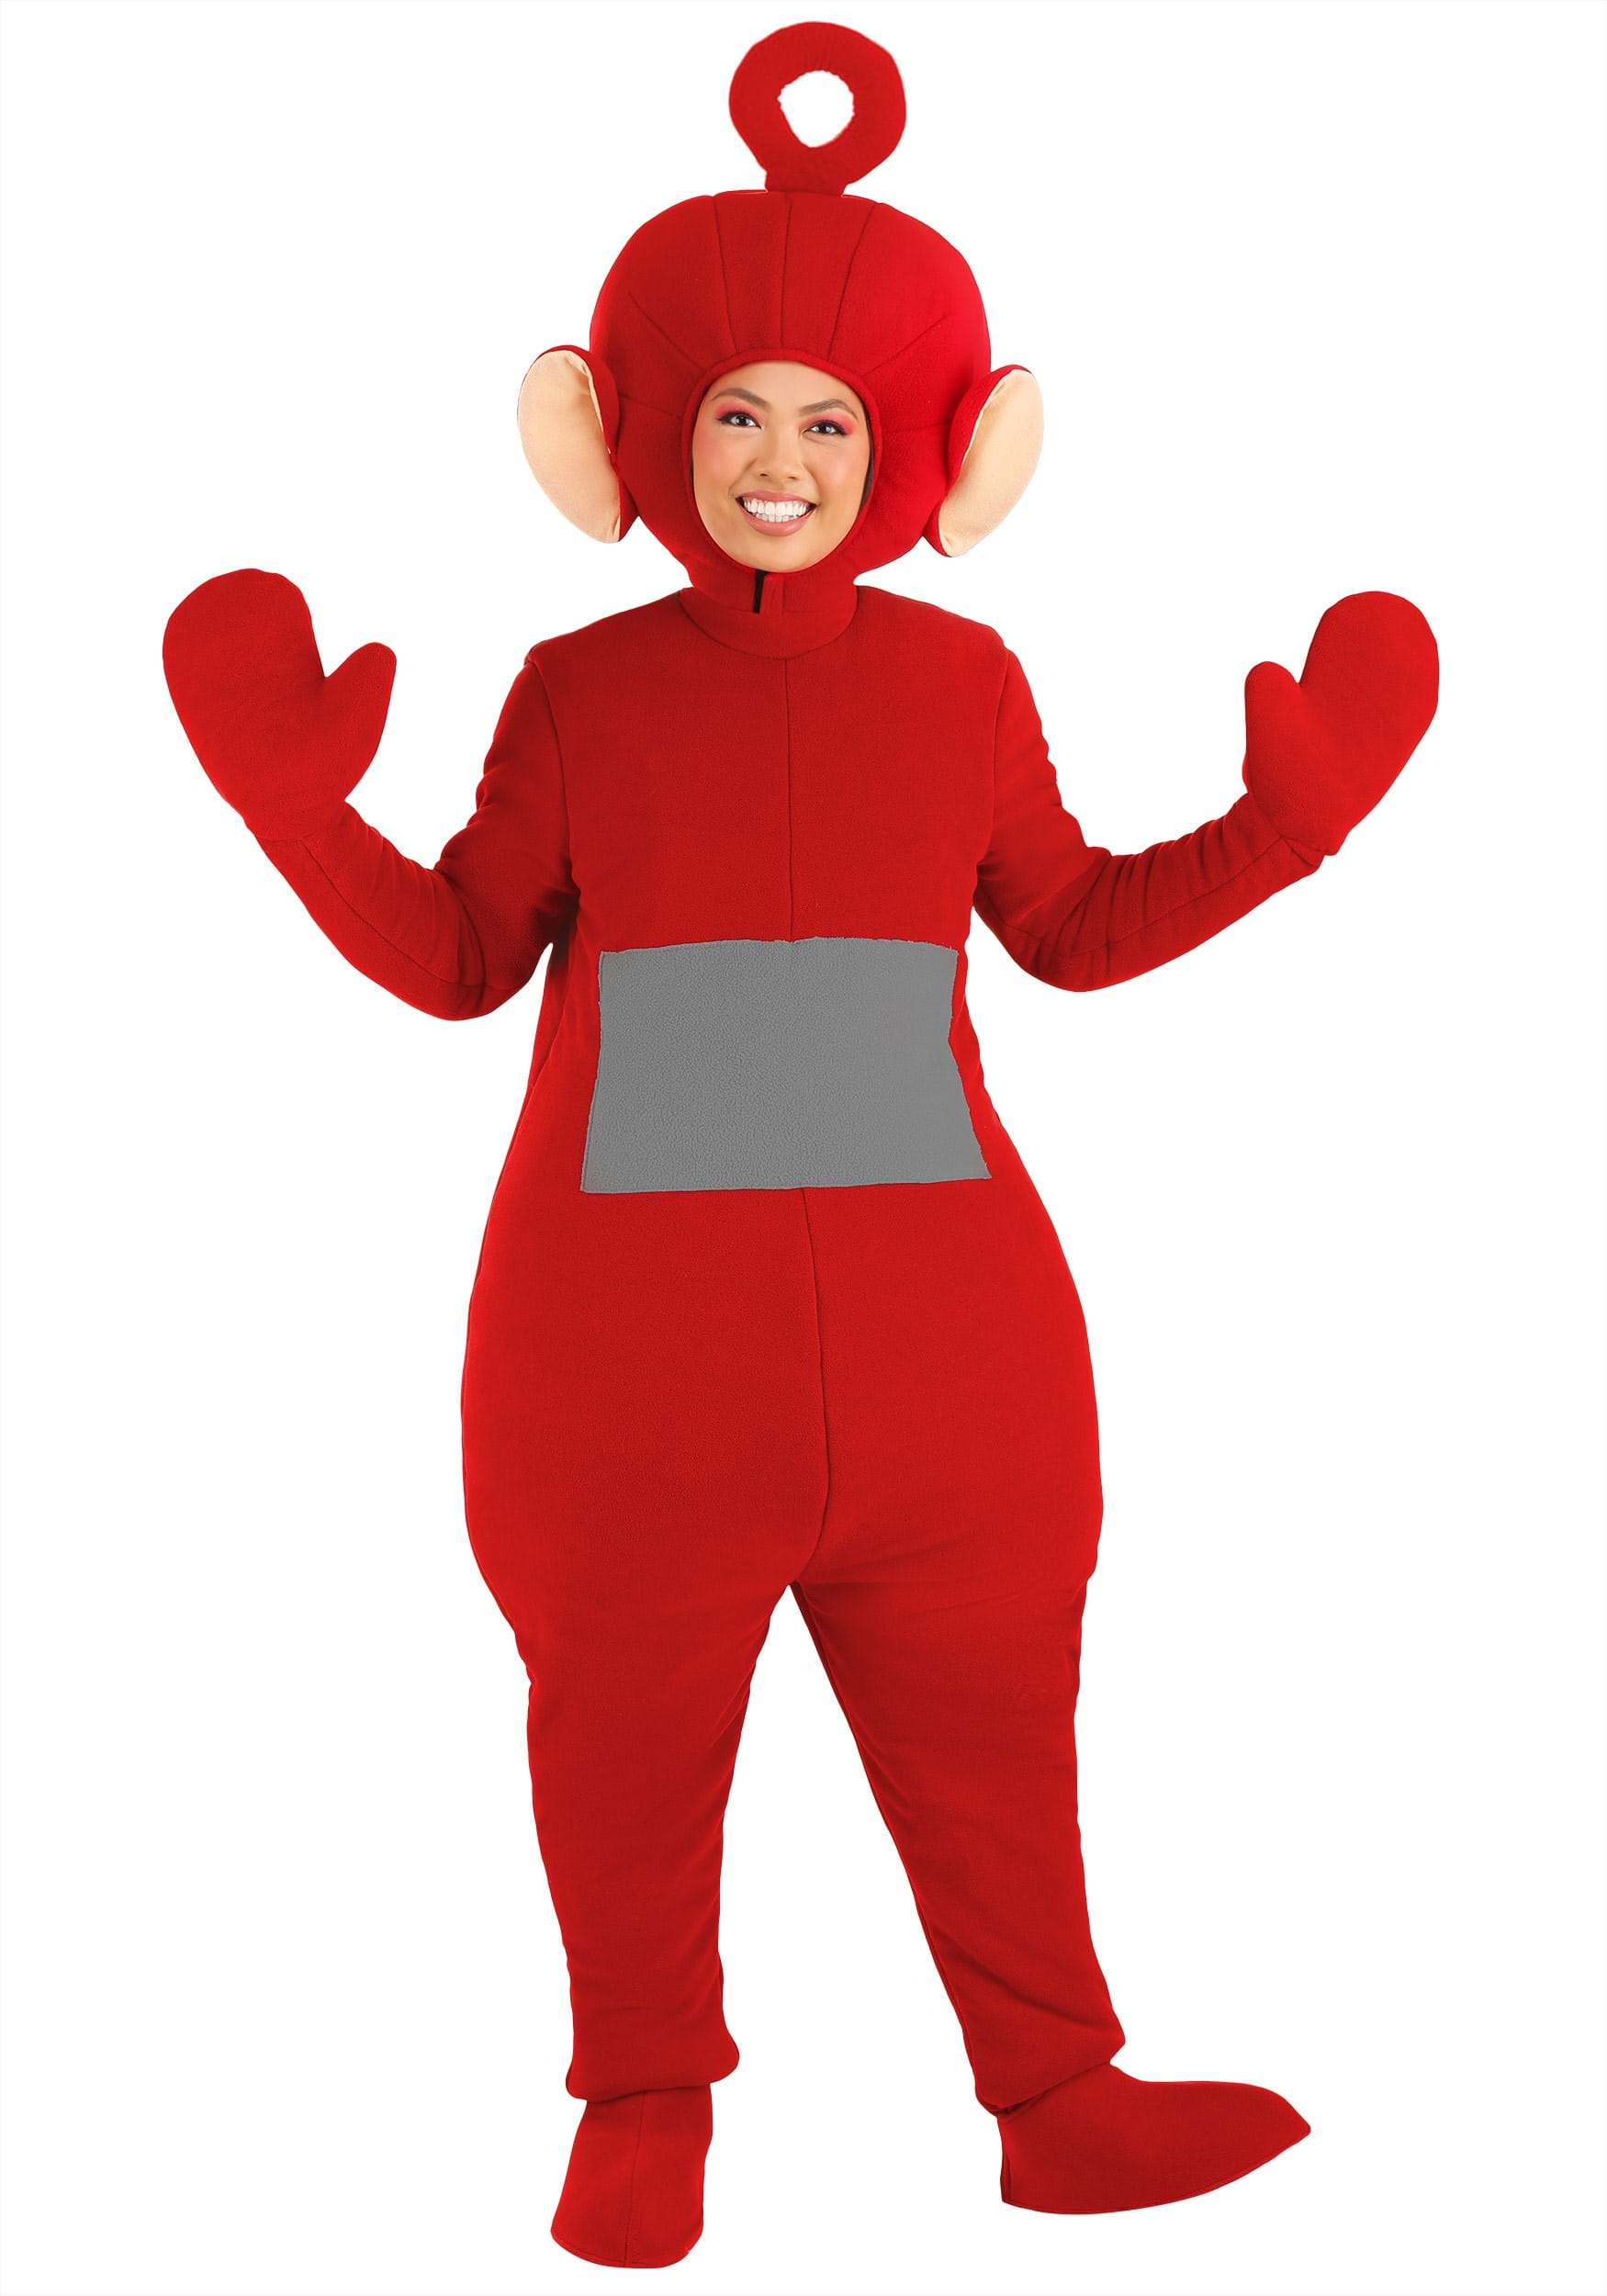 Photos - Fancy Dress FUN Costumes Plus Size Po Teletubbies Costume for Adults Red/White FUN